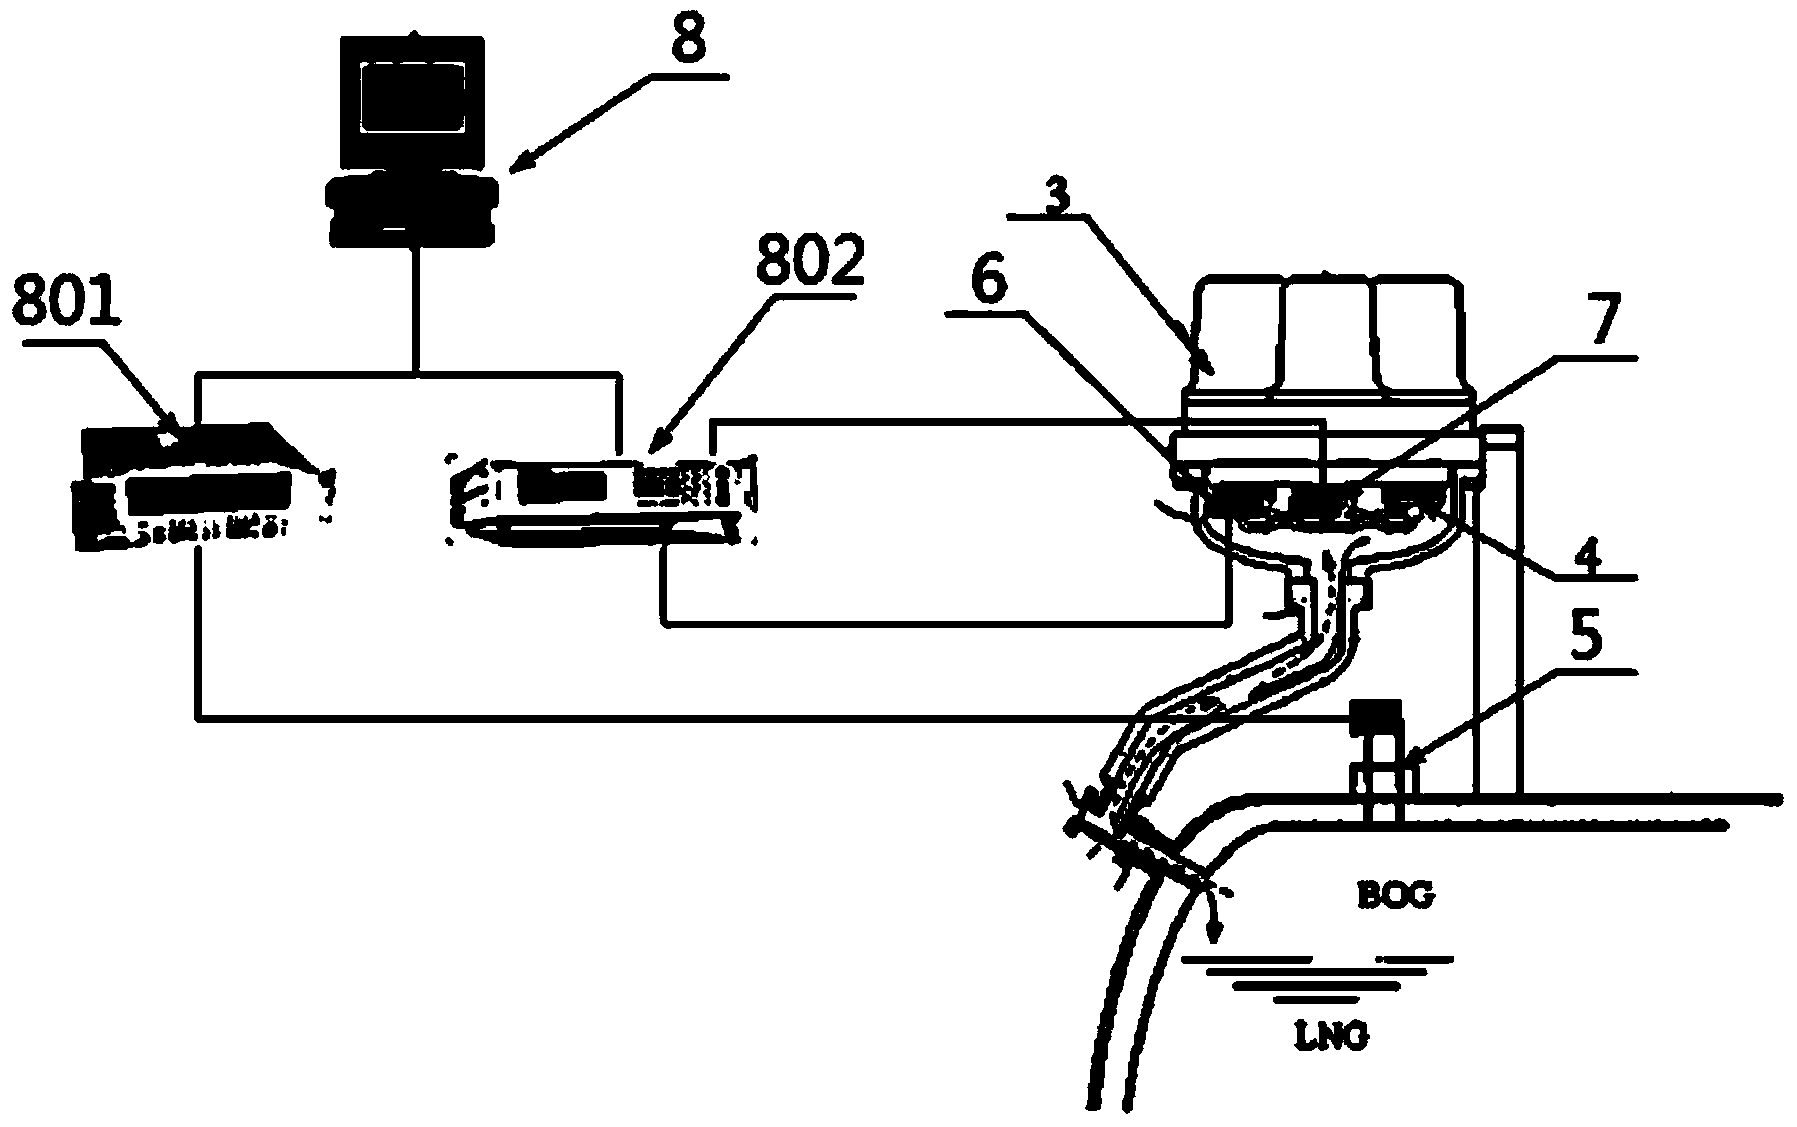 Pumpless circulation method for small skid-mounted evaporation gas reliquefaction and recovery device for liquefied natural gas